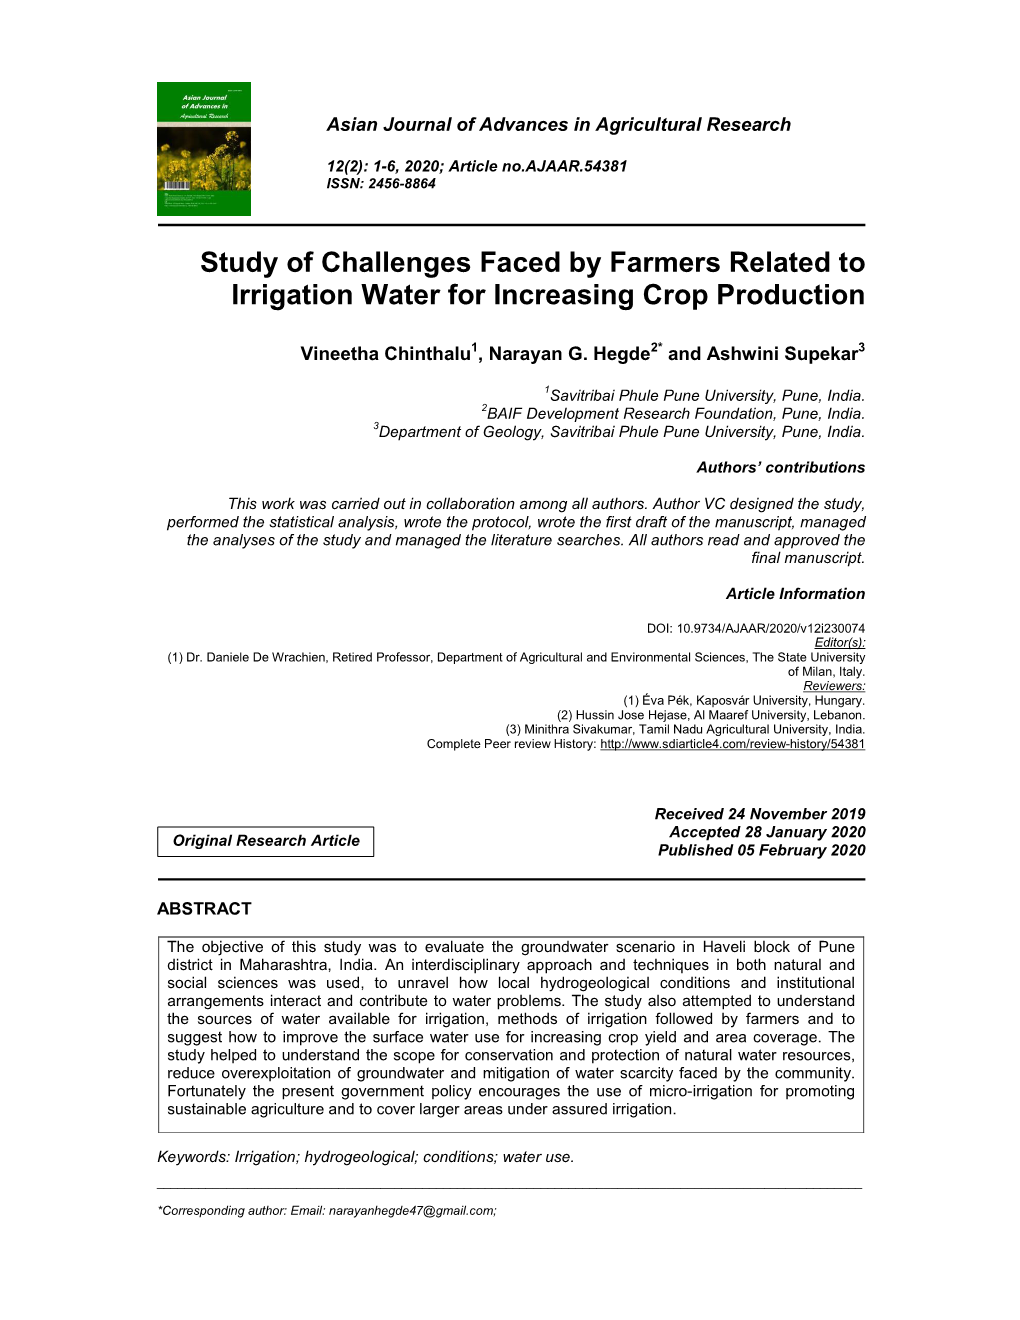 Study of Challenges Faced by Farmers Related to Irrigation Water for Increasing Crop Production